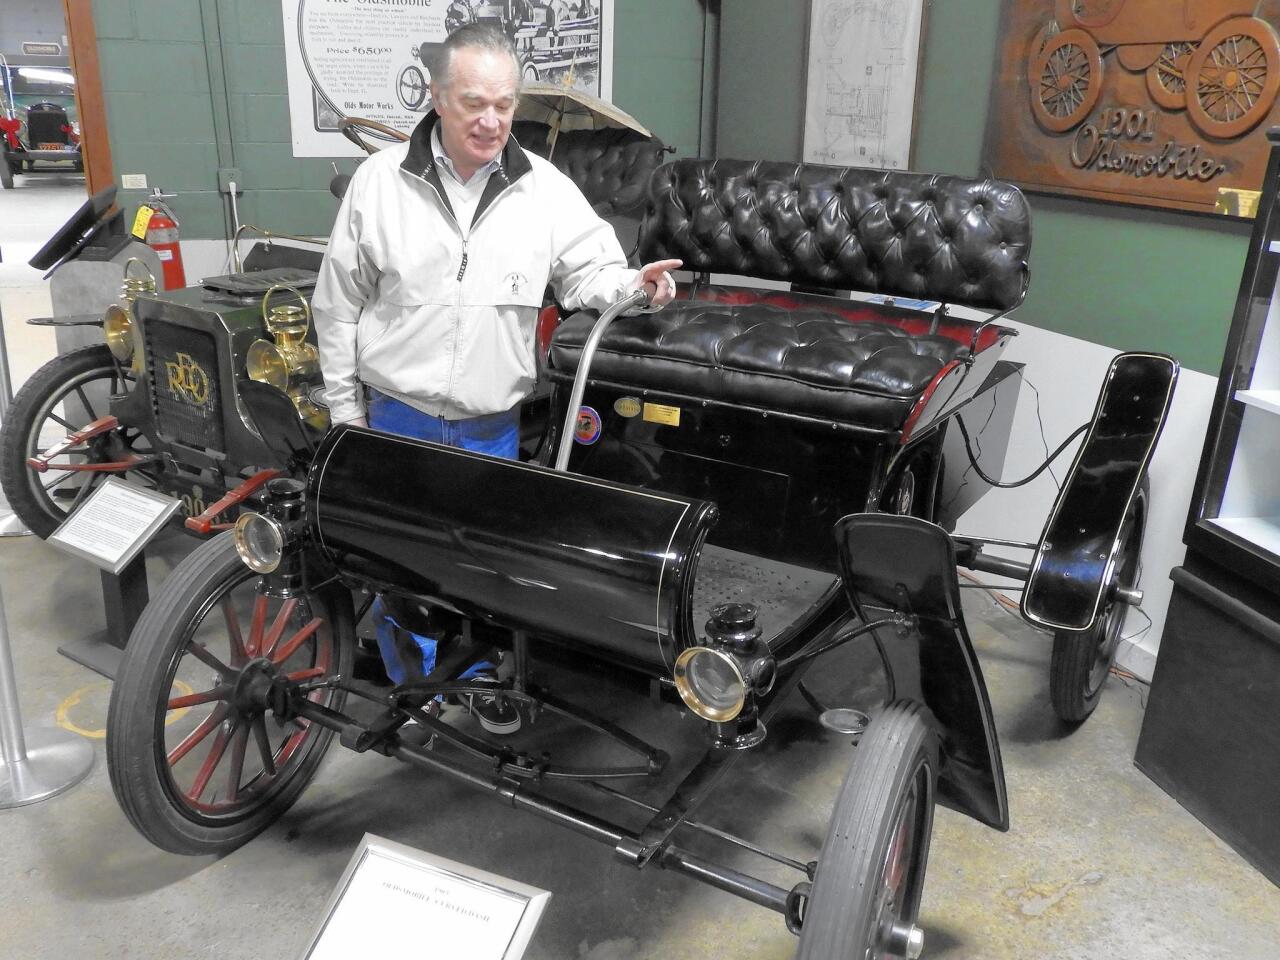 Bill Adcock of the R.E. Olds Transportation Museum in Lansing, Mich., admires one of the earlier vehicles in his collection: a 1904 Oldsmobile Curved-Dash.